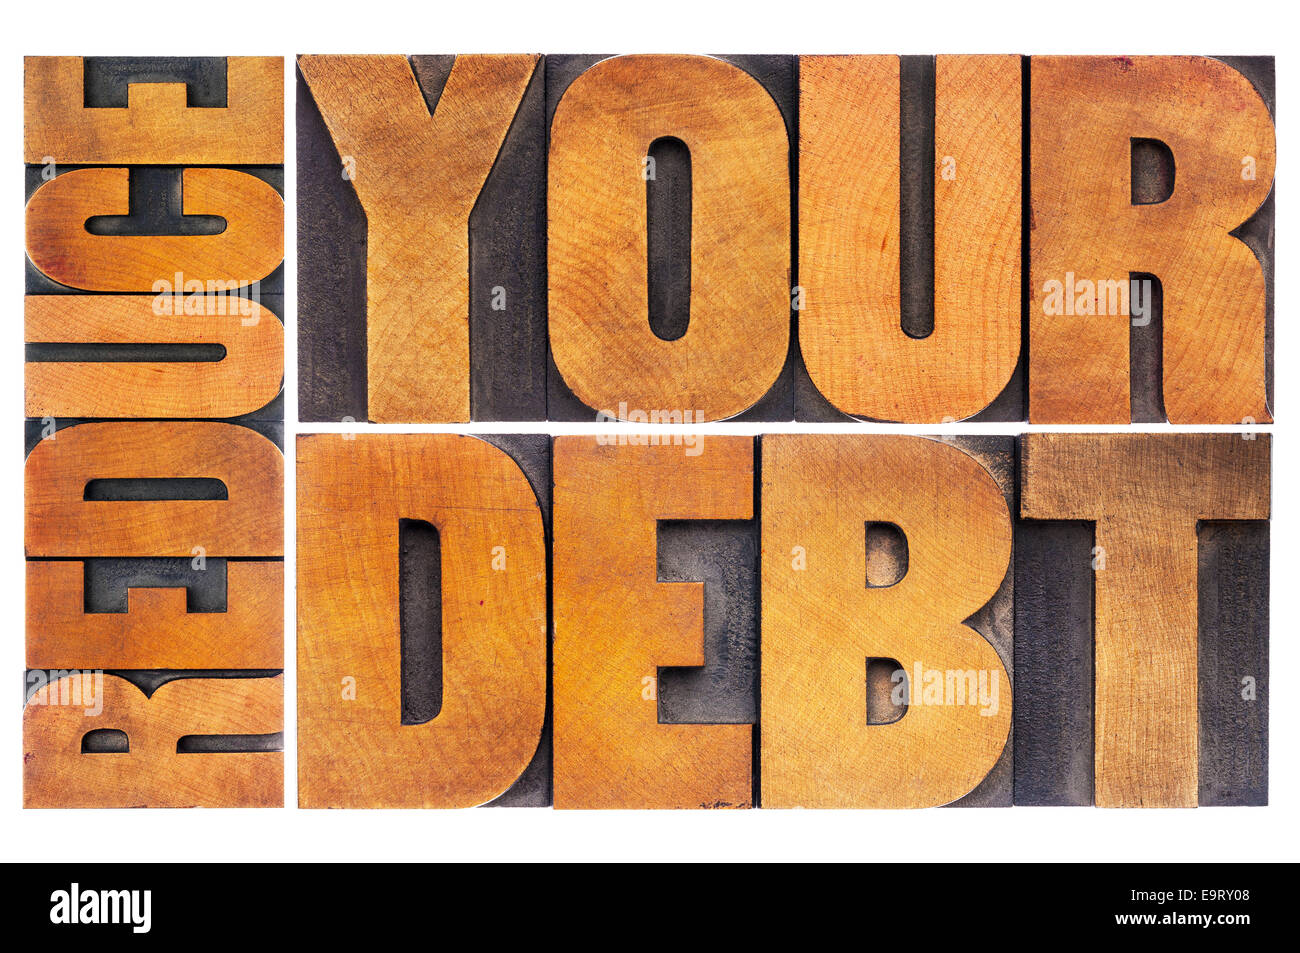 reduce your debt - financial concept - isolated text in vintage letterpress wood type Stock Photo